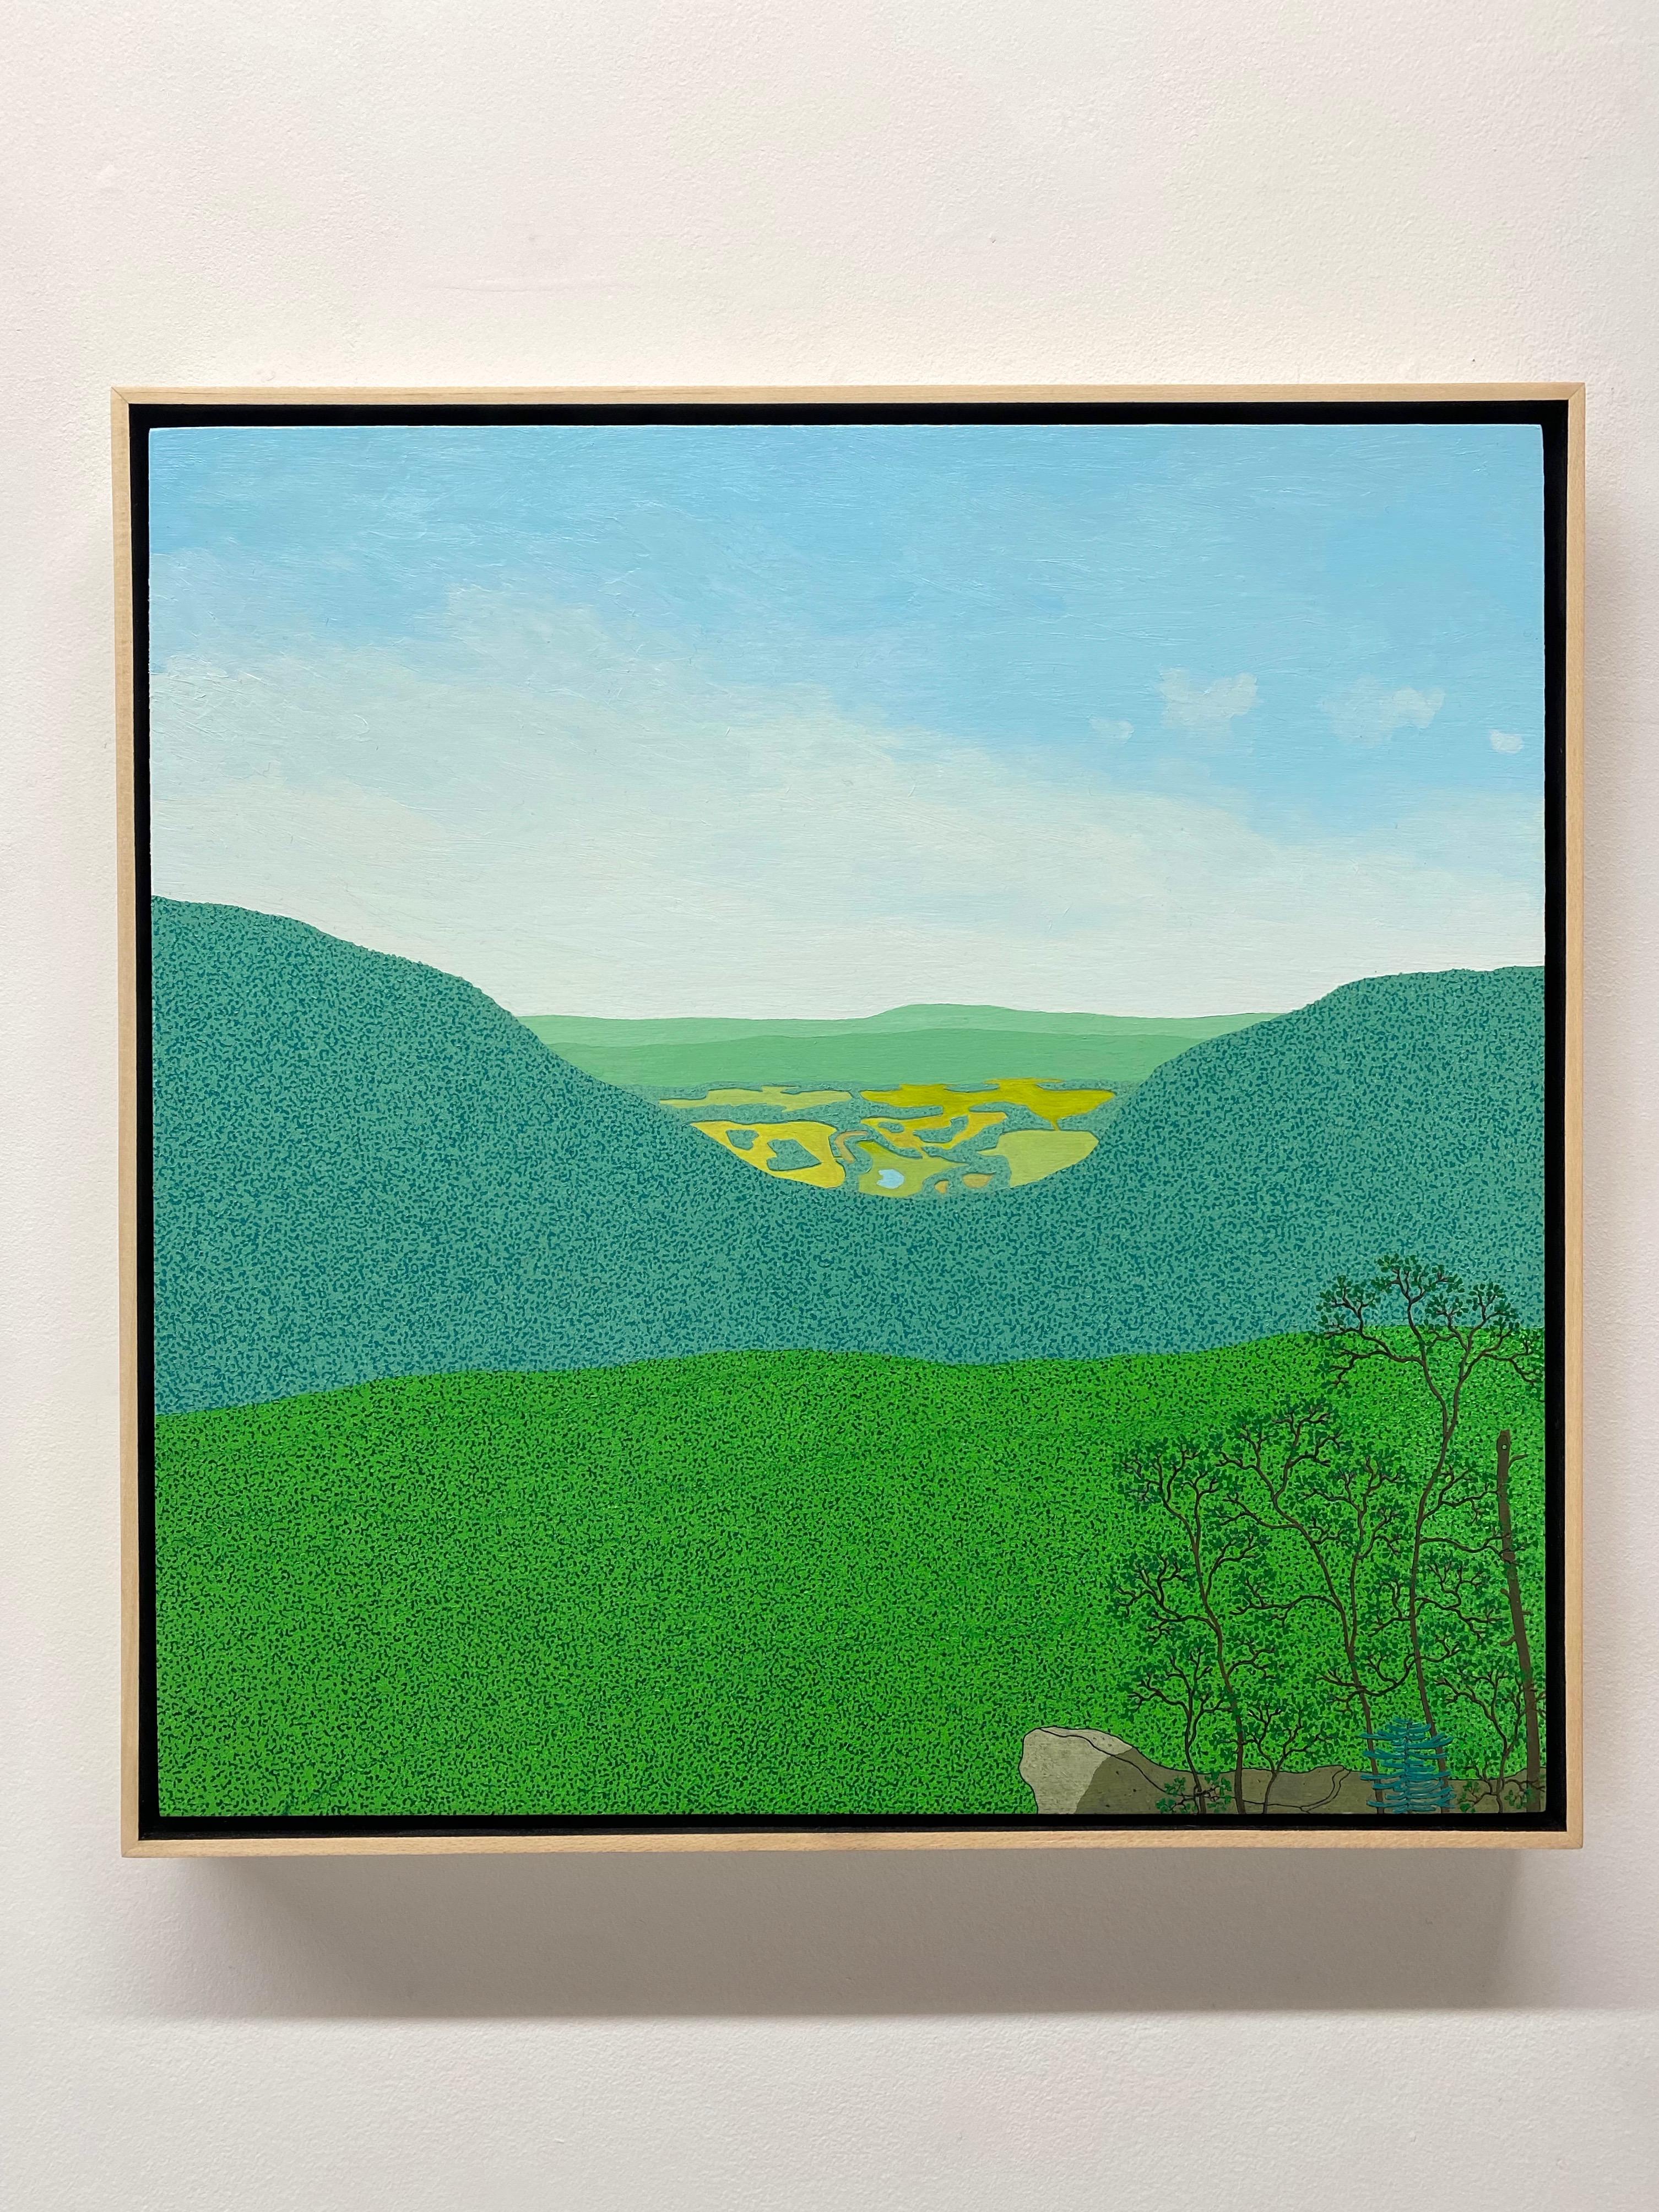 Ridge View Wyatt Mt, Landscape, Blue Sky, Clouds, Trees, Mountains, Virginia - Painting by Gregory Hennen